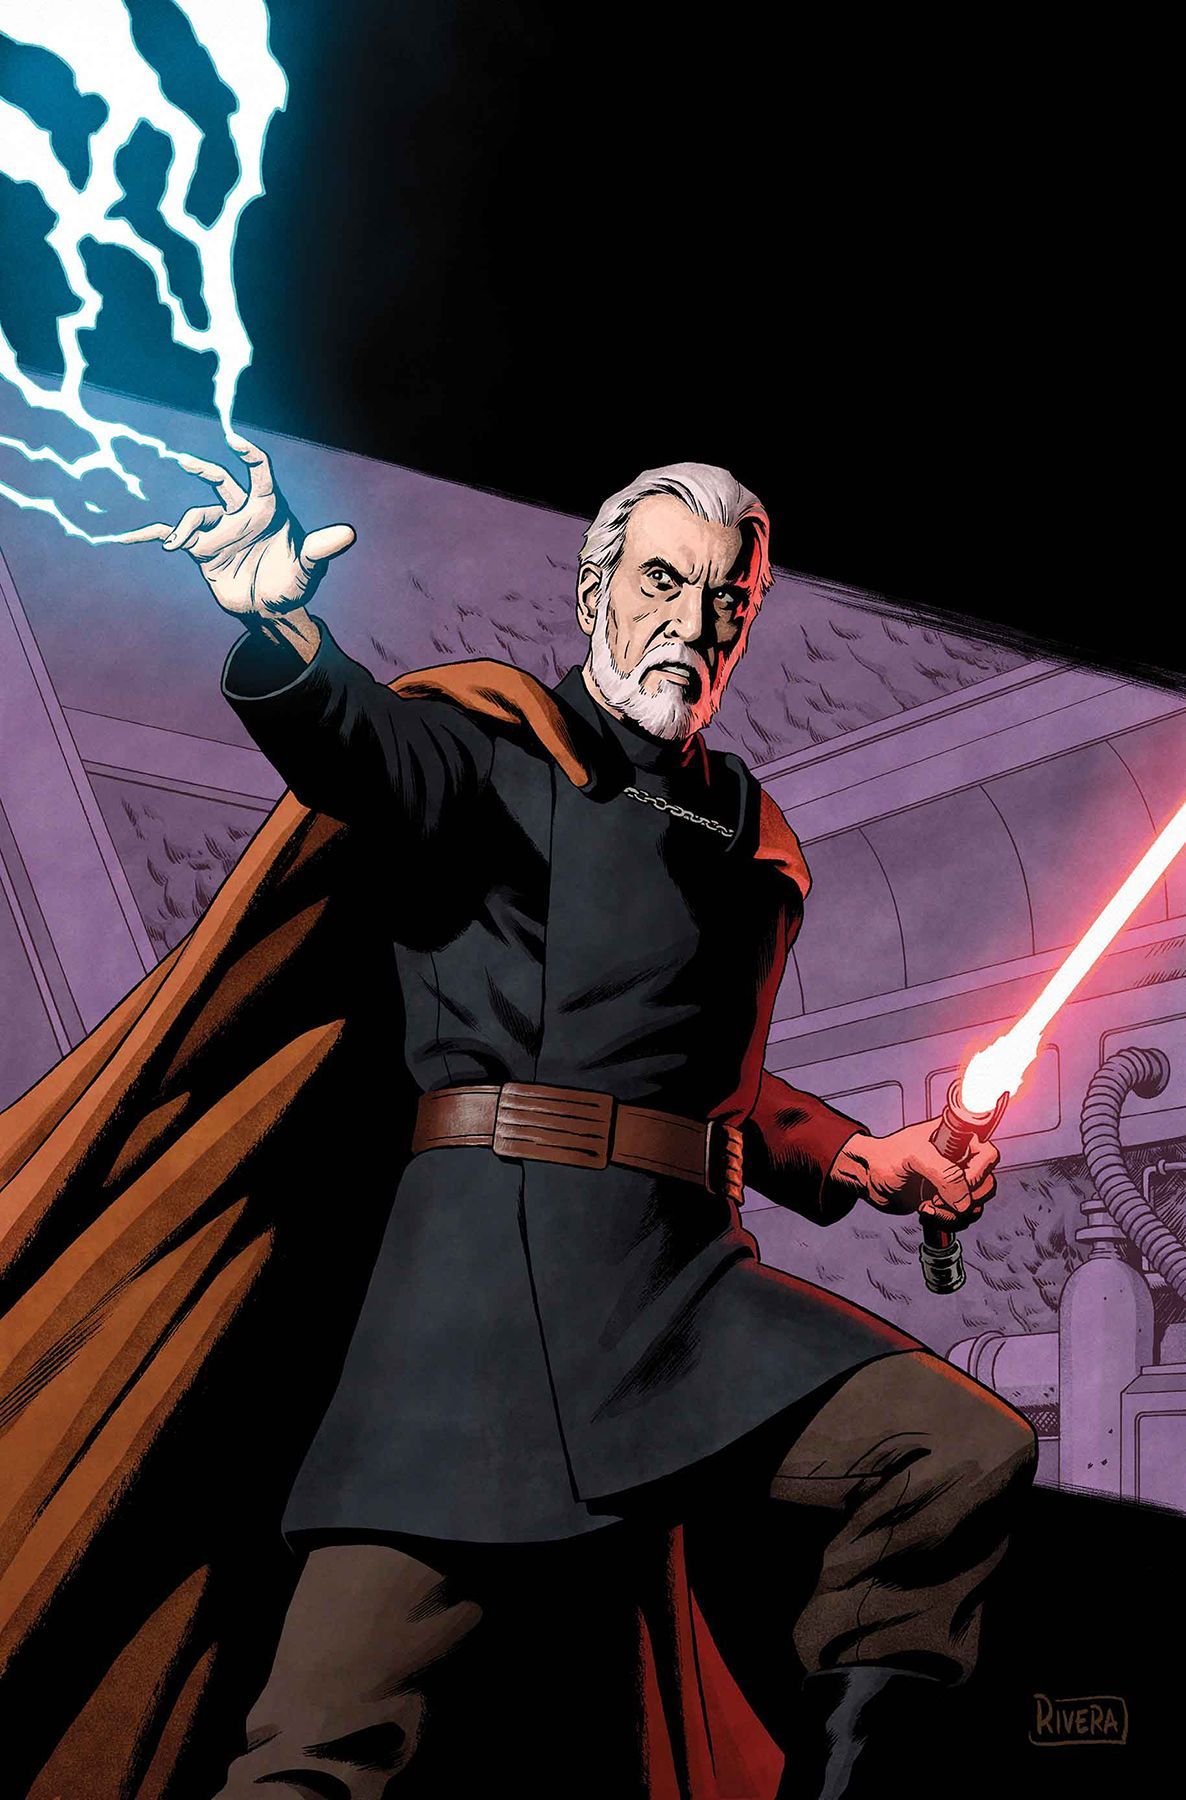 Star Wars: Age of Republic Dooku by Paolo Rivera *. Star wars comics, Star wars image, Star wars